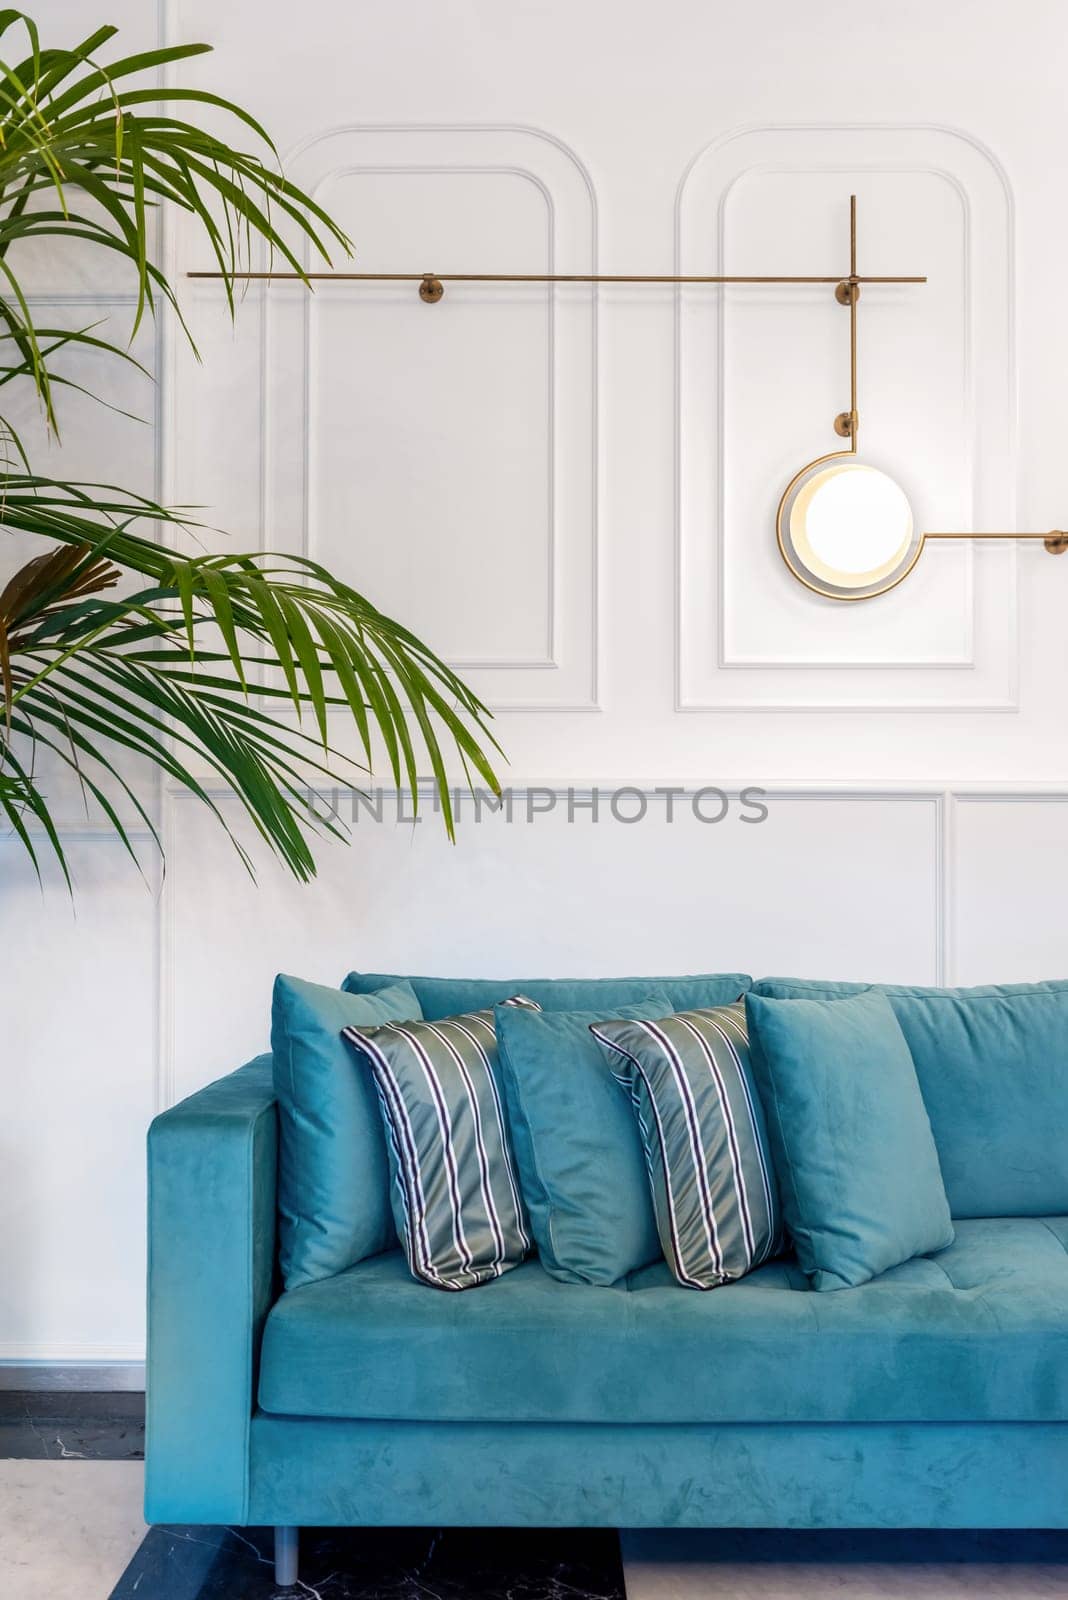 Turquoise sofa and green leafy plant in the interior of the living room in front of white decorative illuminated wall by Sonat